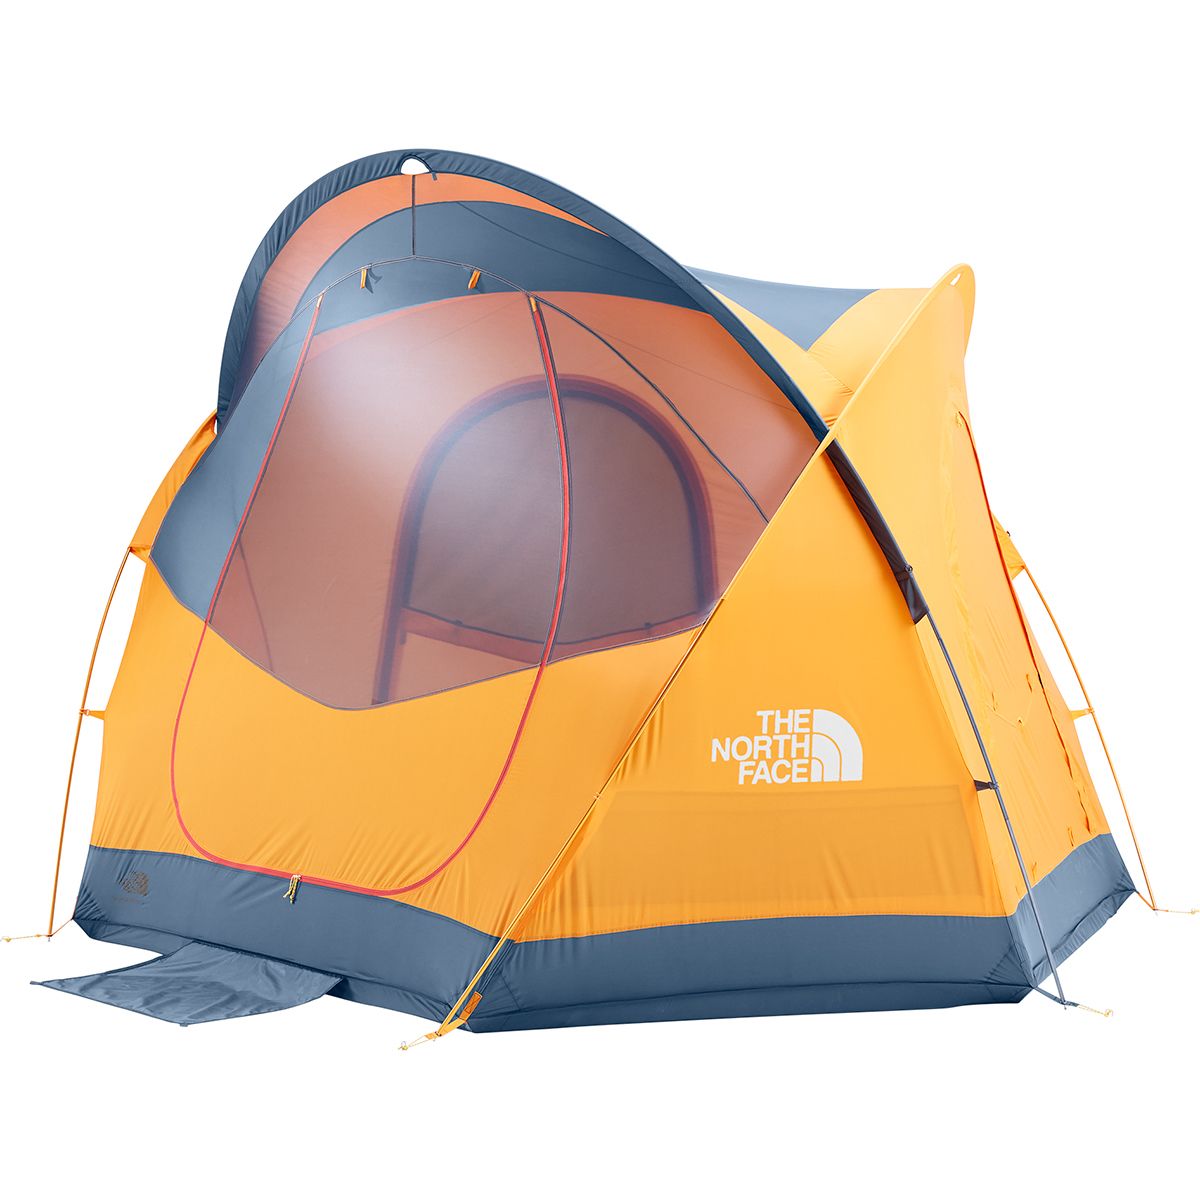 The North Face Homestead Super Dome 4 Tent - Hike & Camp